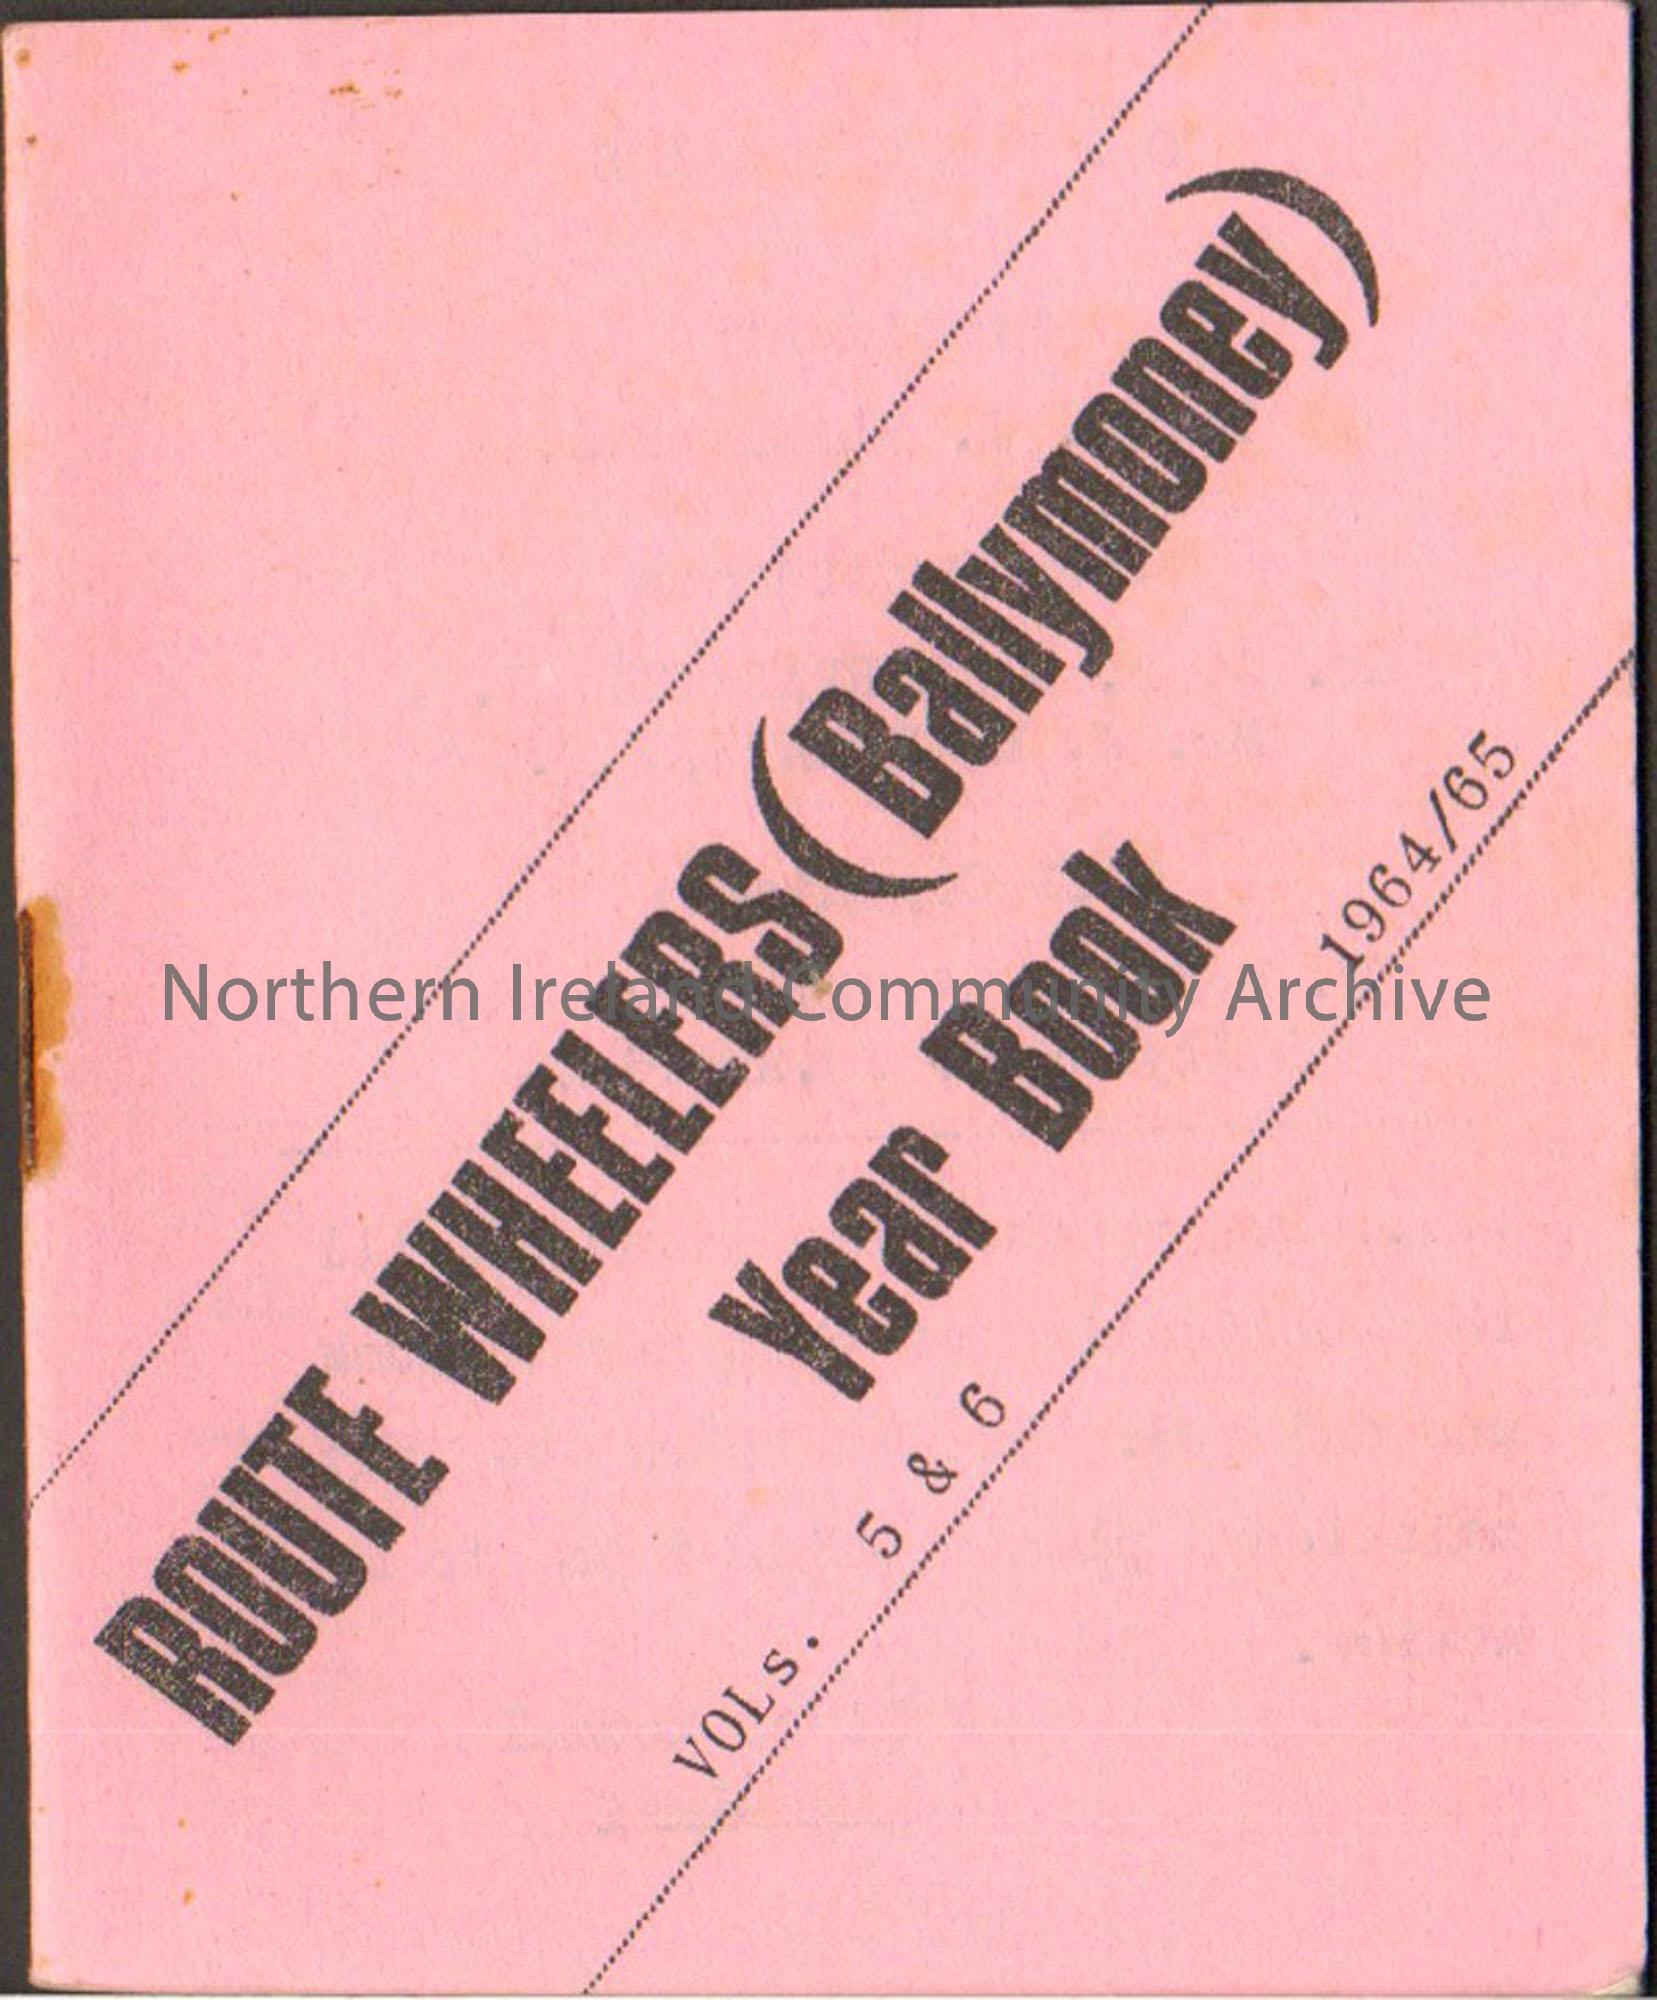 Route Wheelers (Ballymoney) Year Book Vols. 5 and 6 1964/65. Pink booklet.